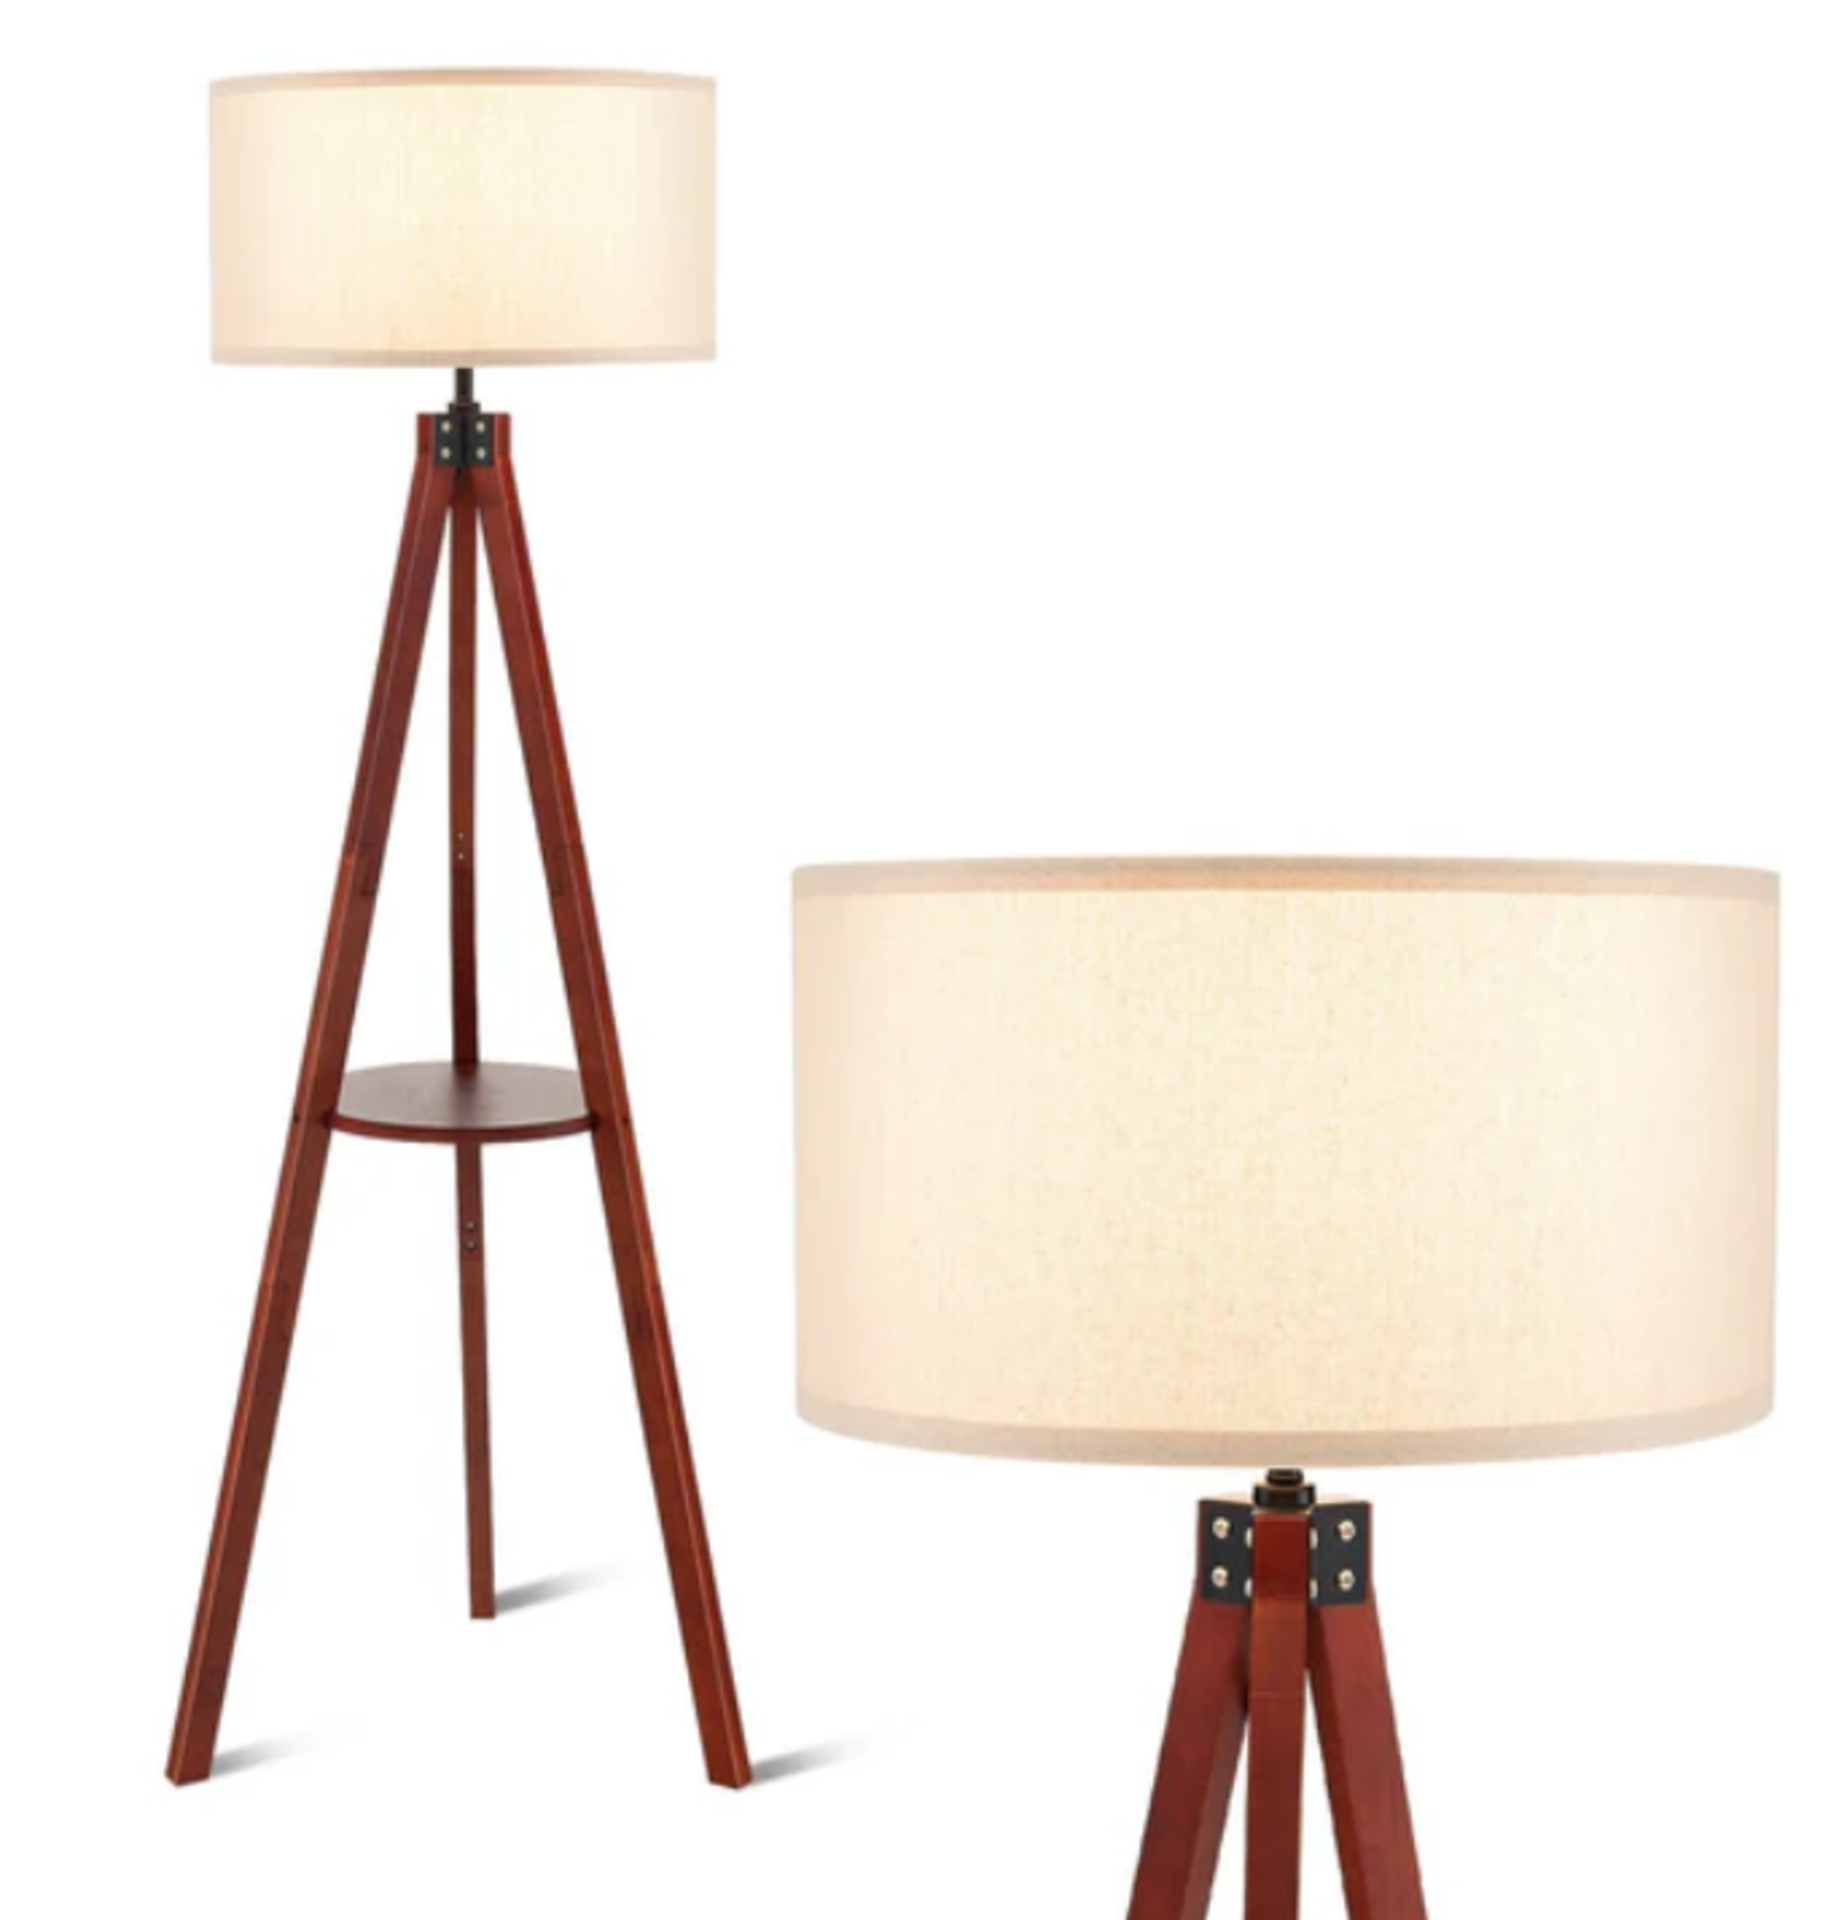 Tripod Floor Lamp Tall with Shelf and Foot Switch with E27 Lamp Base-Brown. - R13a.13.